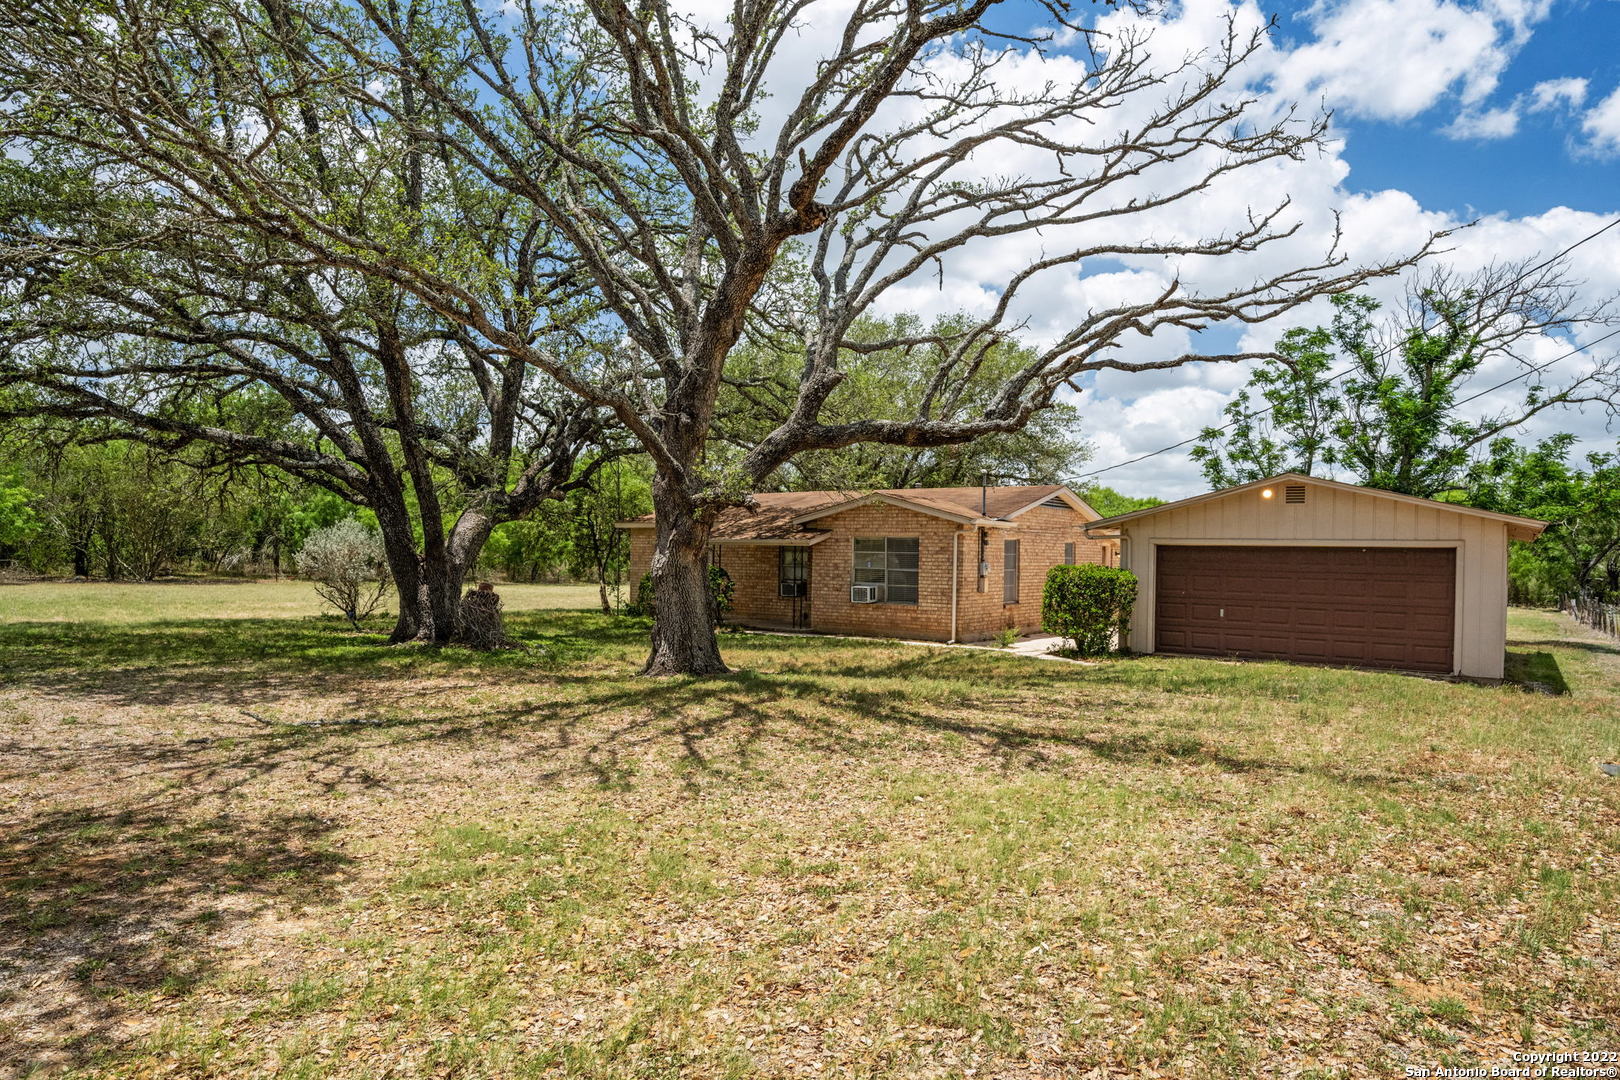 Location, location! Over 1 acre on Loop 1604 South! Country living in San Antonio! Charming 2 bedroom, 1.5 bath brick home with a 2 car detached garage with a large man-cave attached! Bring your trailers for plenty of parking! NO RESTRICTIONS!